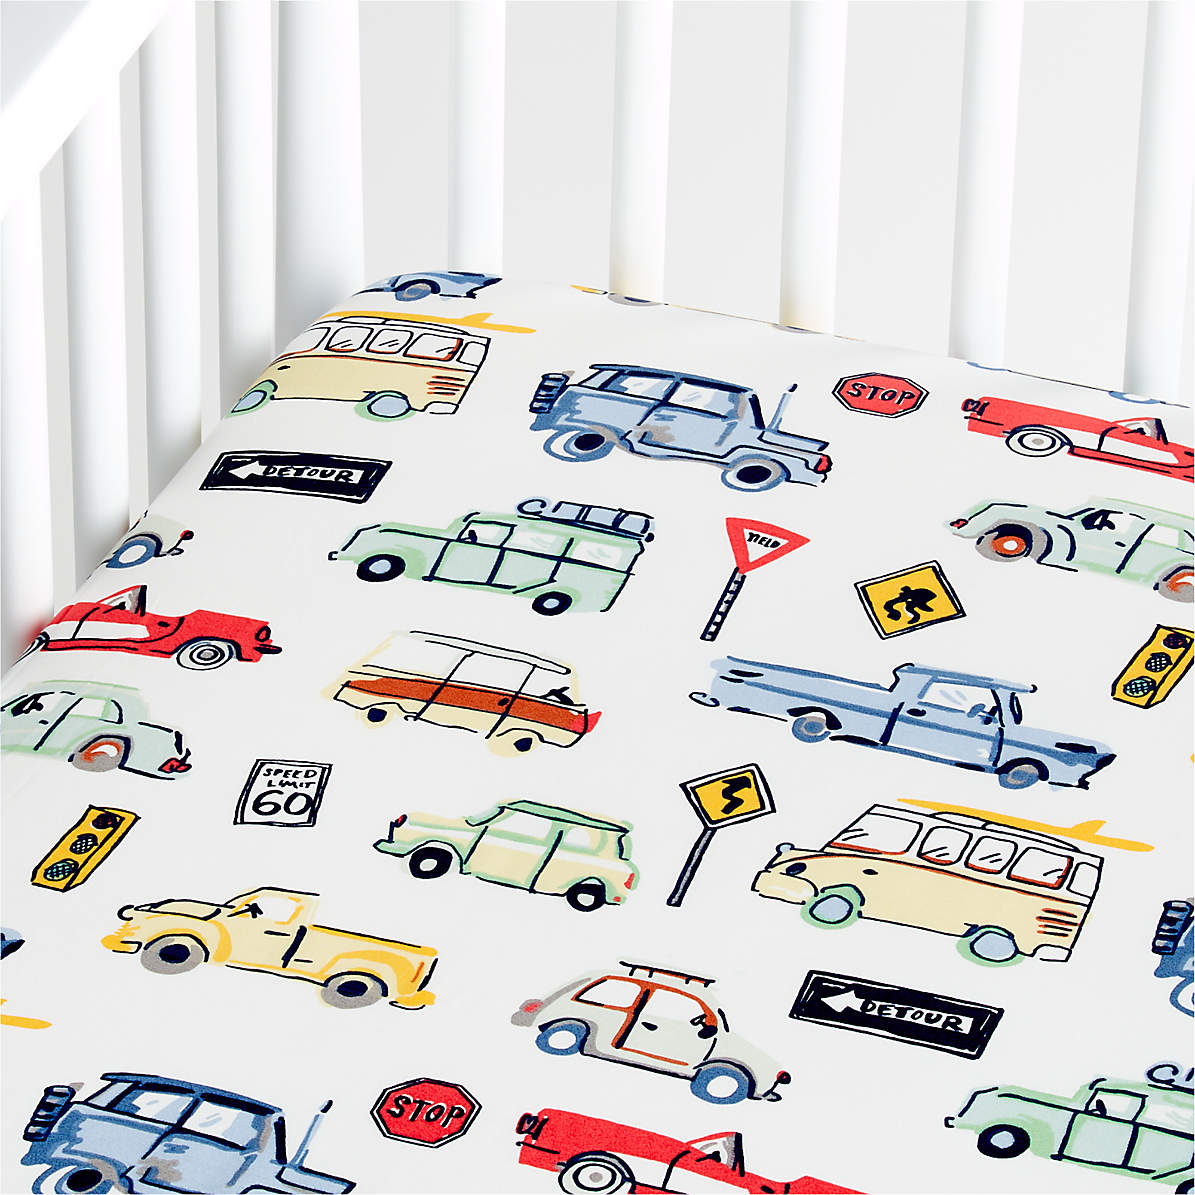 baby bed bumper guards